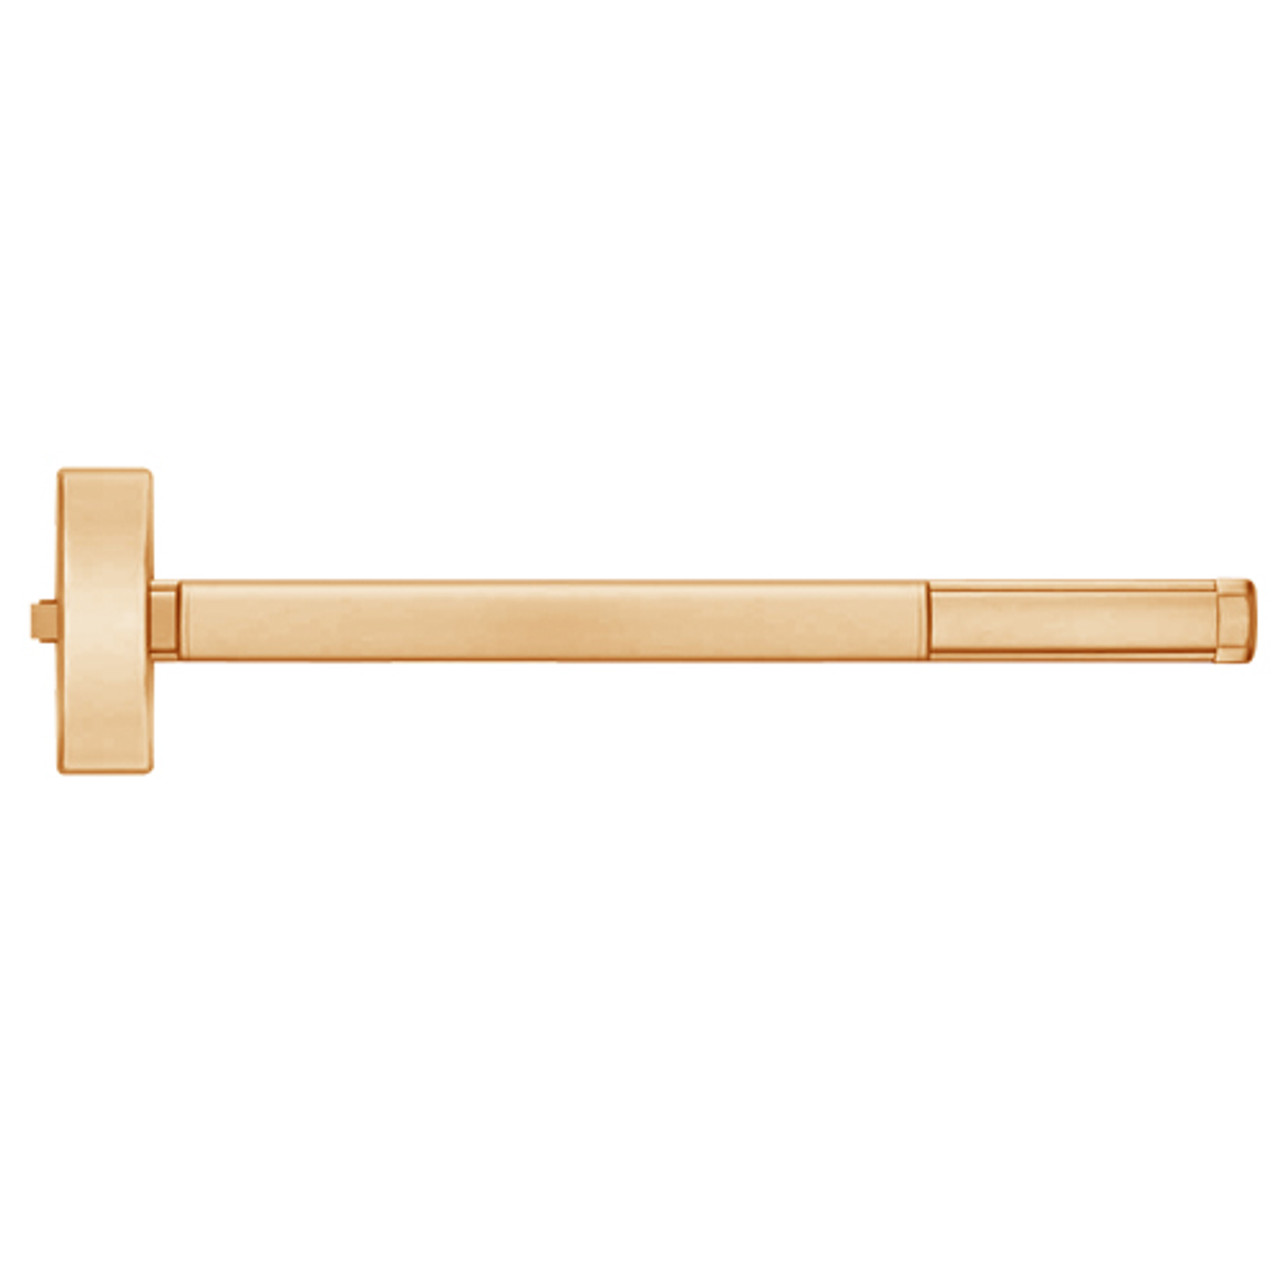 DE2103-612-36 PHI 2100 Series Non Fire Rated Apex Rim Exit Device with Delayed Egress Prepped for Key Retracts Latchbolt in Satin Bronze Finish